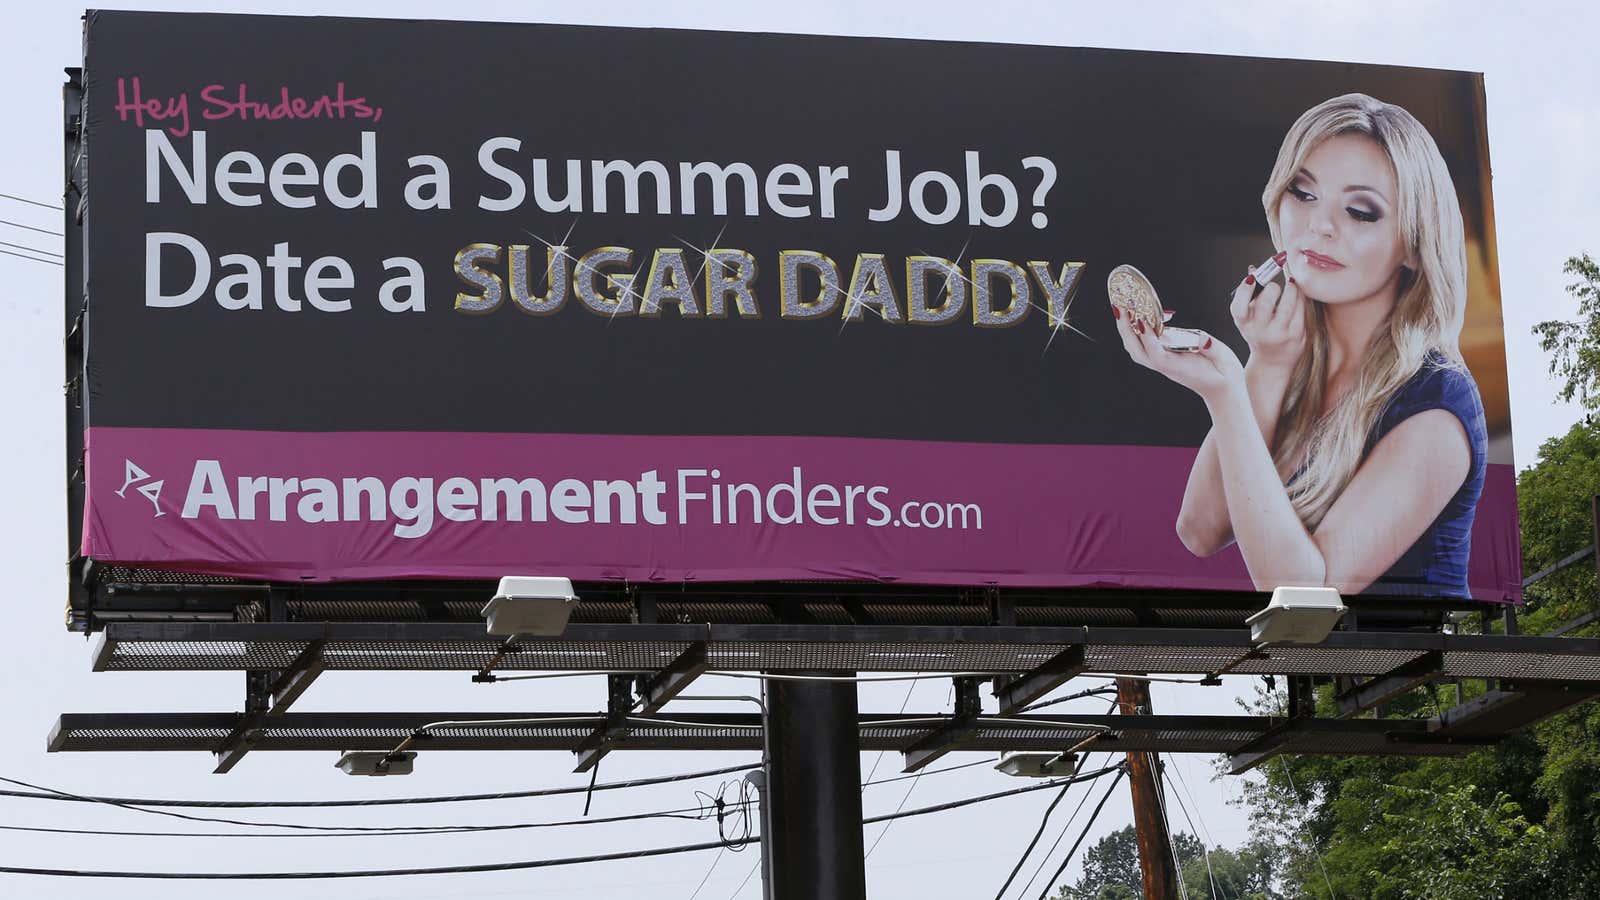 This is a real billboard.